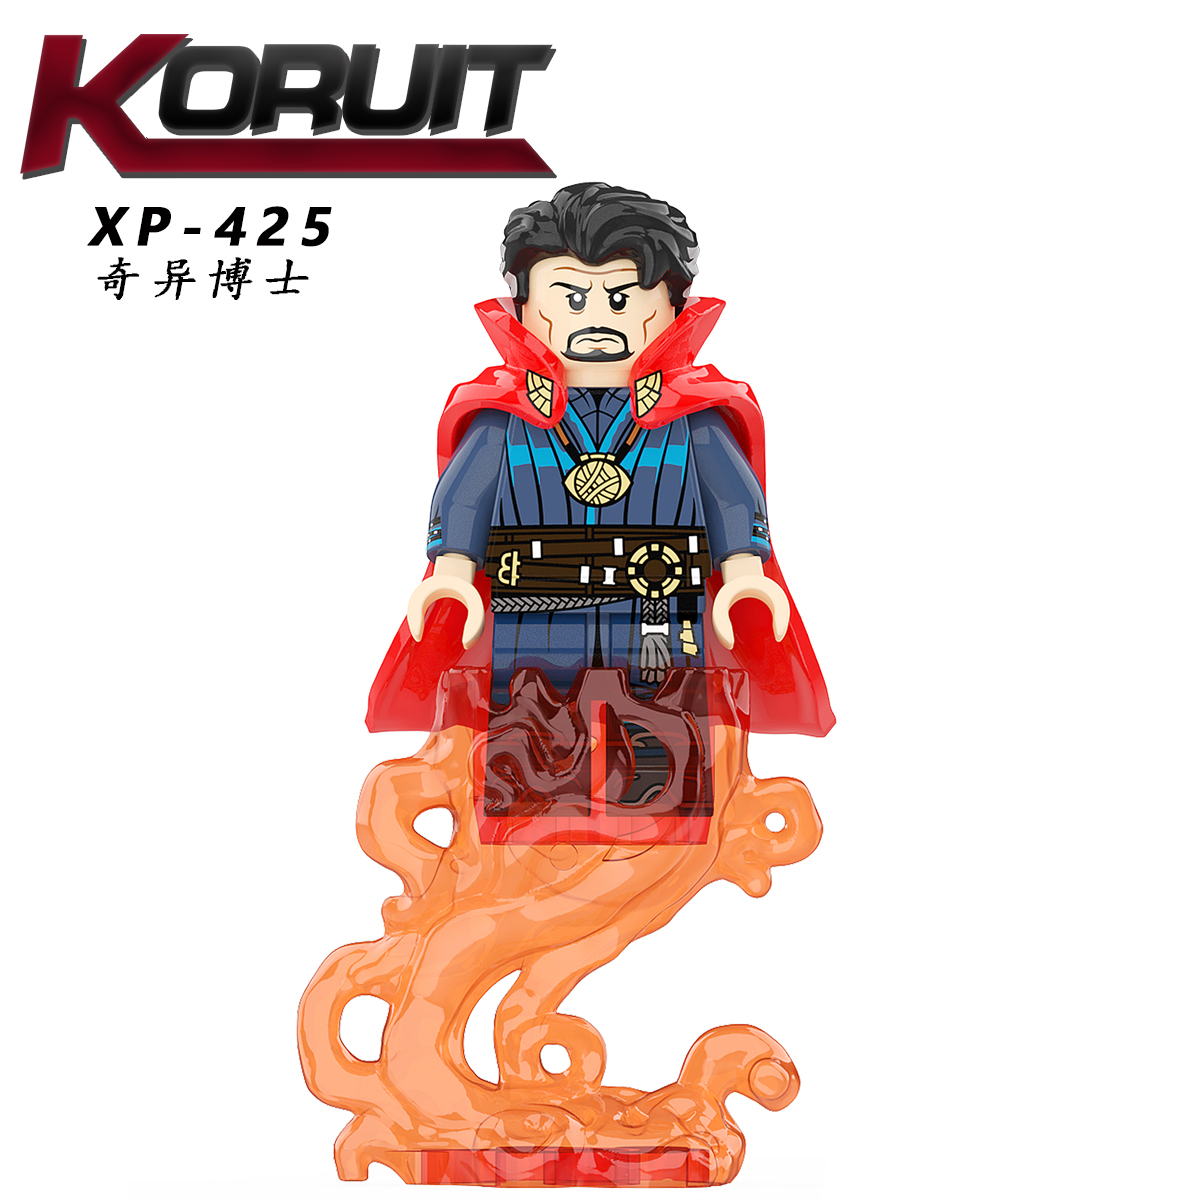 XP419 XP420 XP421 XP422 XP423 XP424 XP425 XP426 KT1055 Building Blocks Bricks Spiderman Green Goblin Doctor Strange Movie Series Action Educational Toys for Kids Gifts 